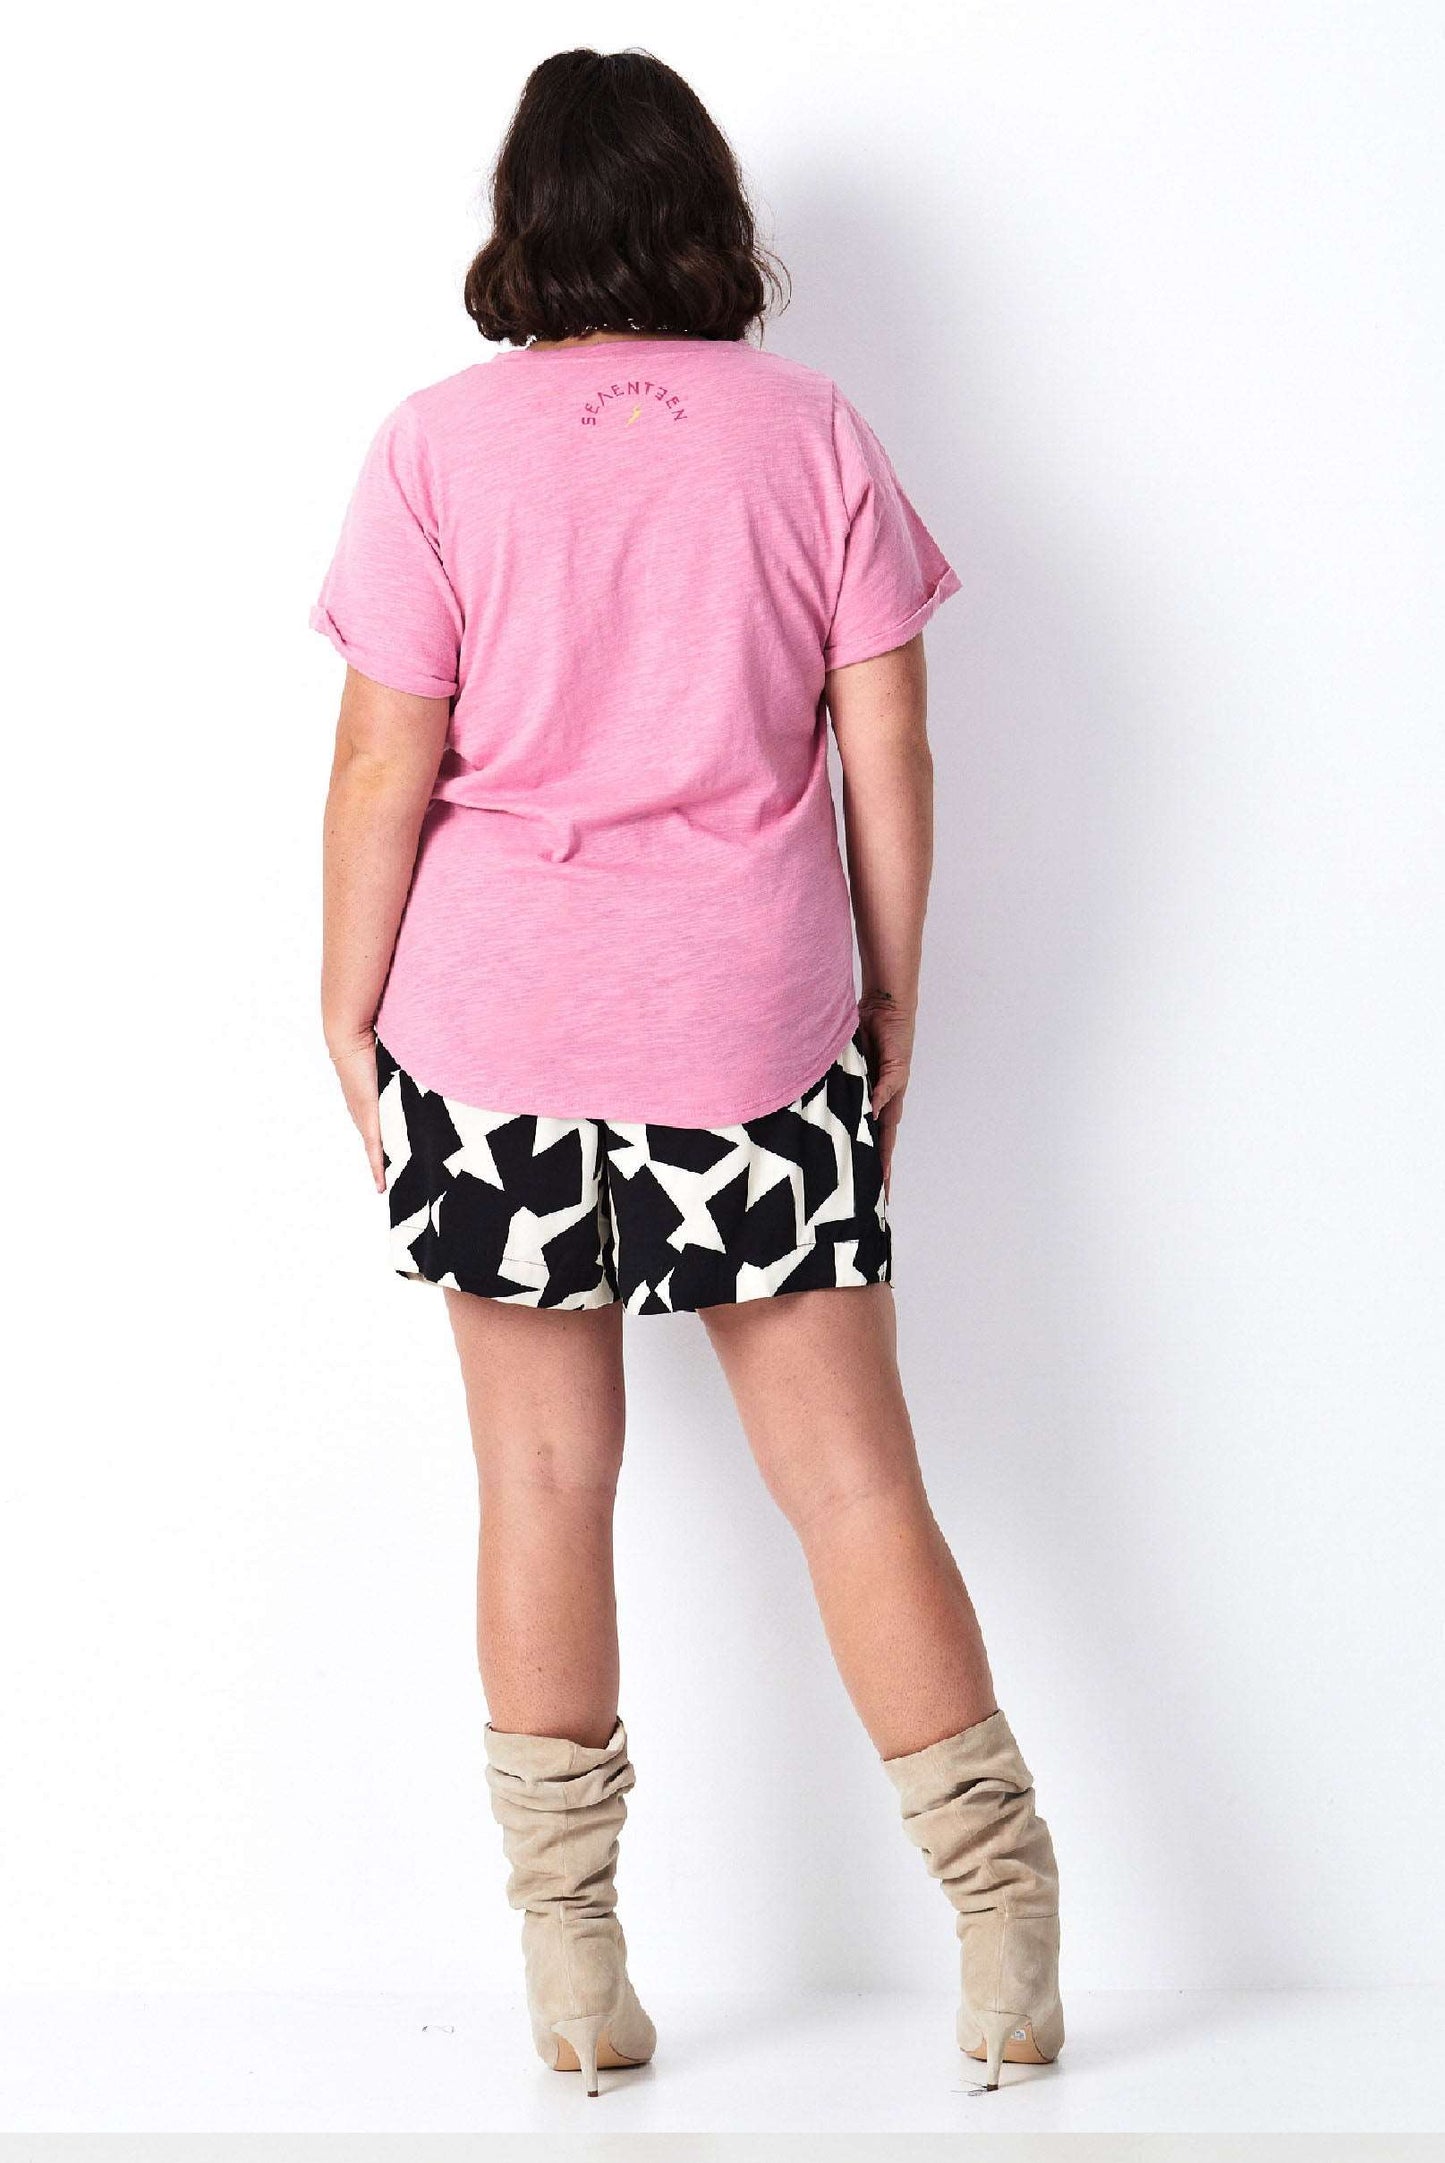 Model wears pink cotton plus size tee with print